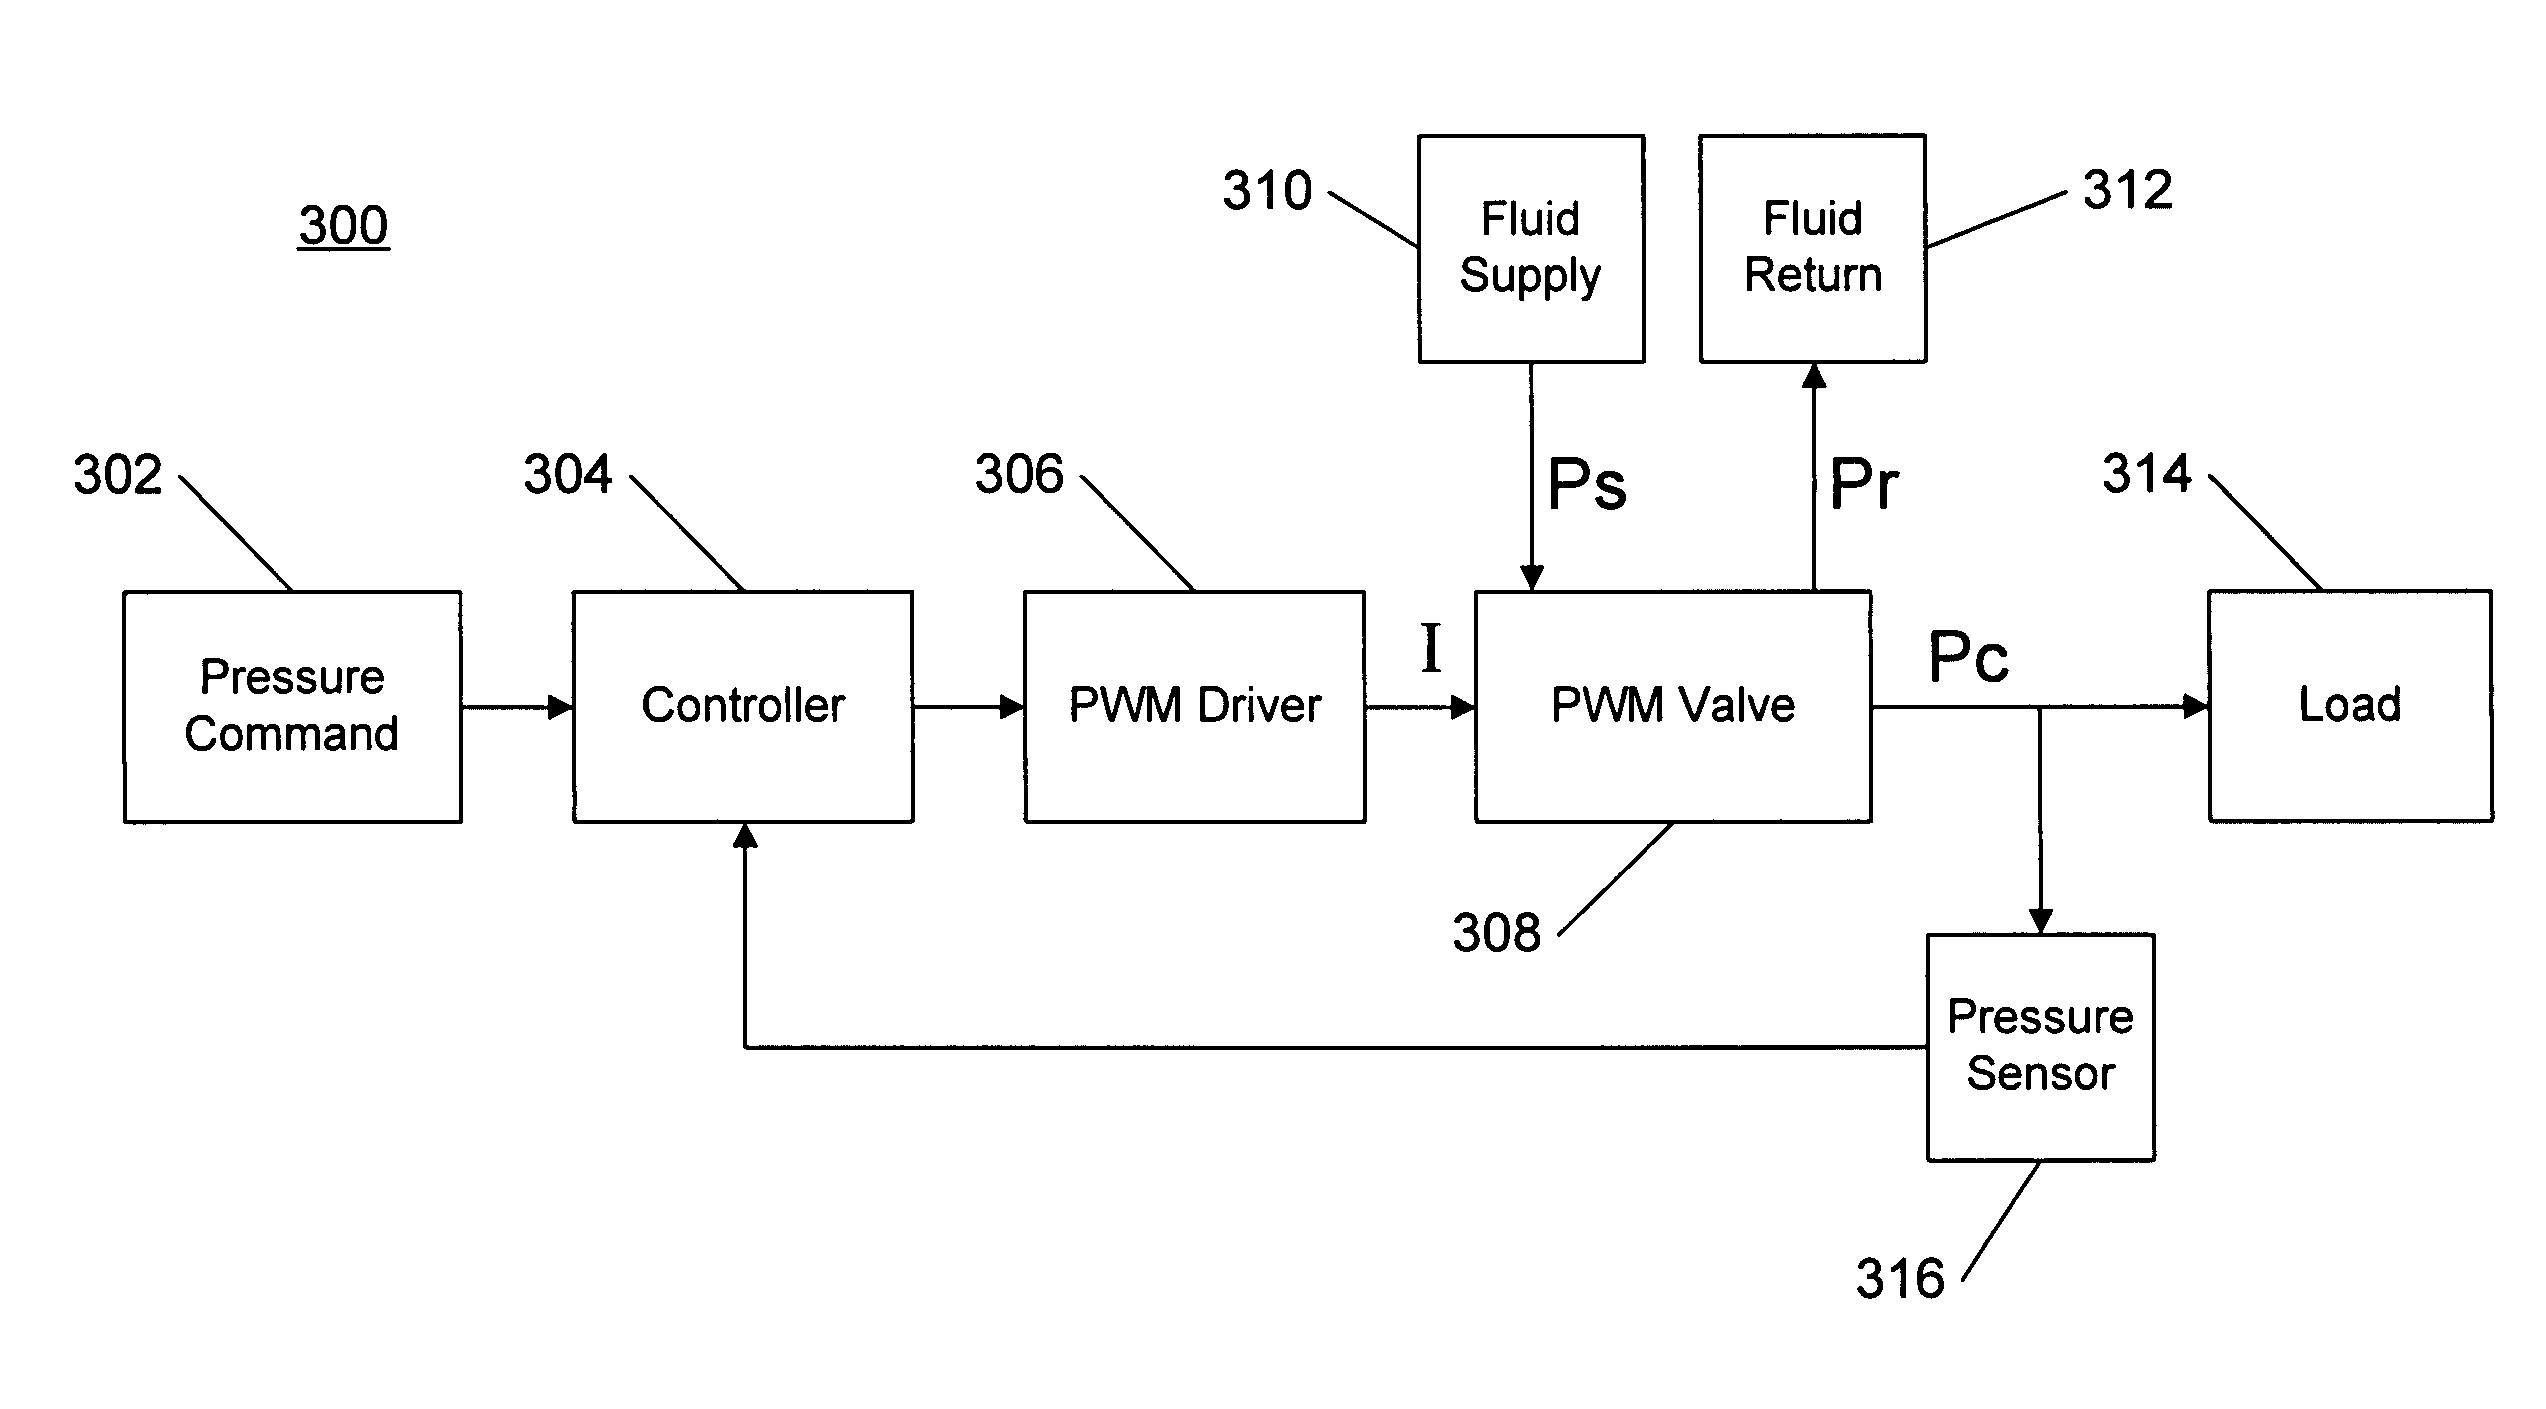 Mode selection and switching logic in a closed-loop pulse width modulation valve-based transmission control system